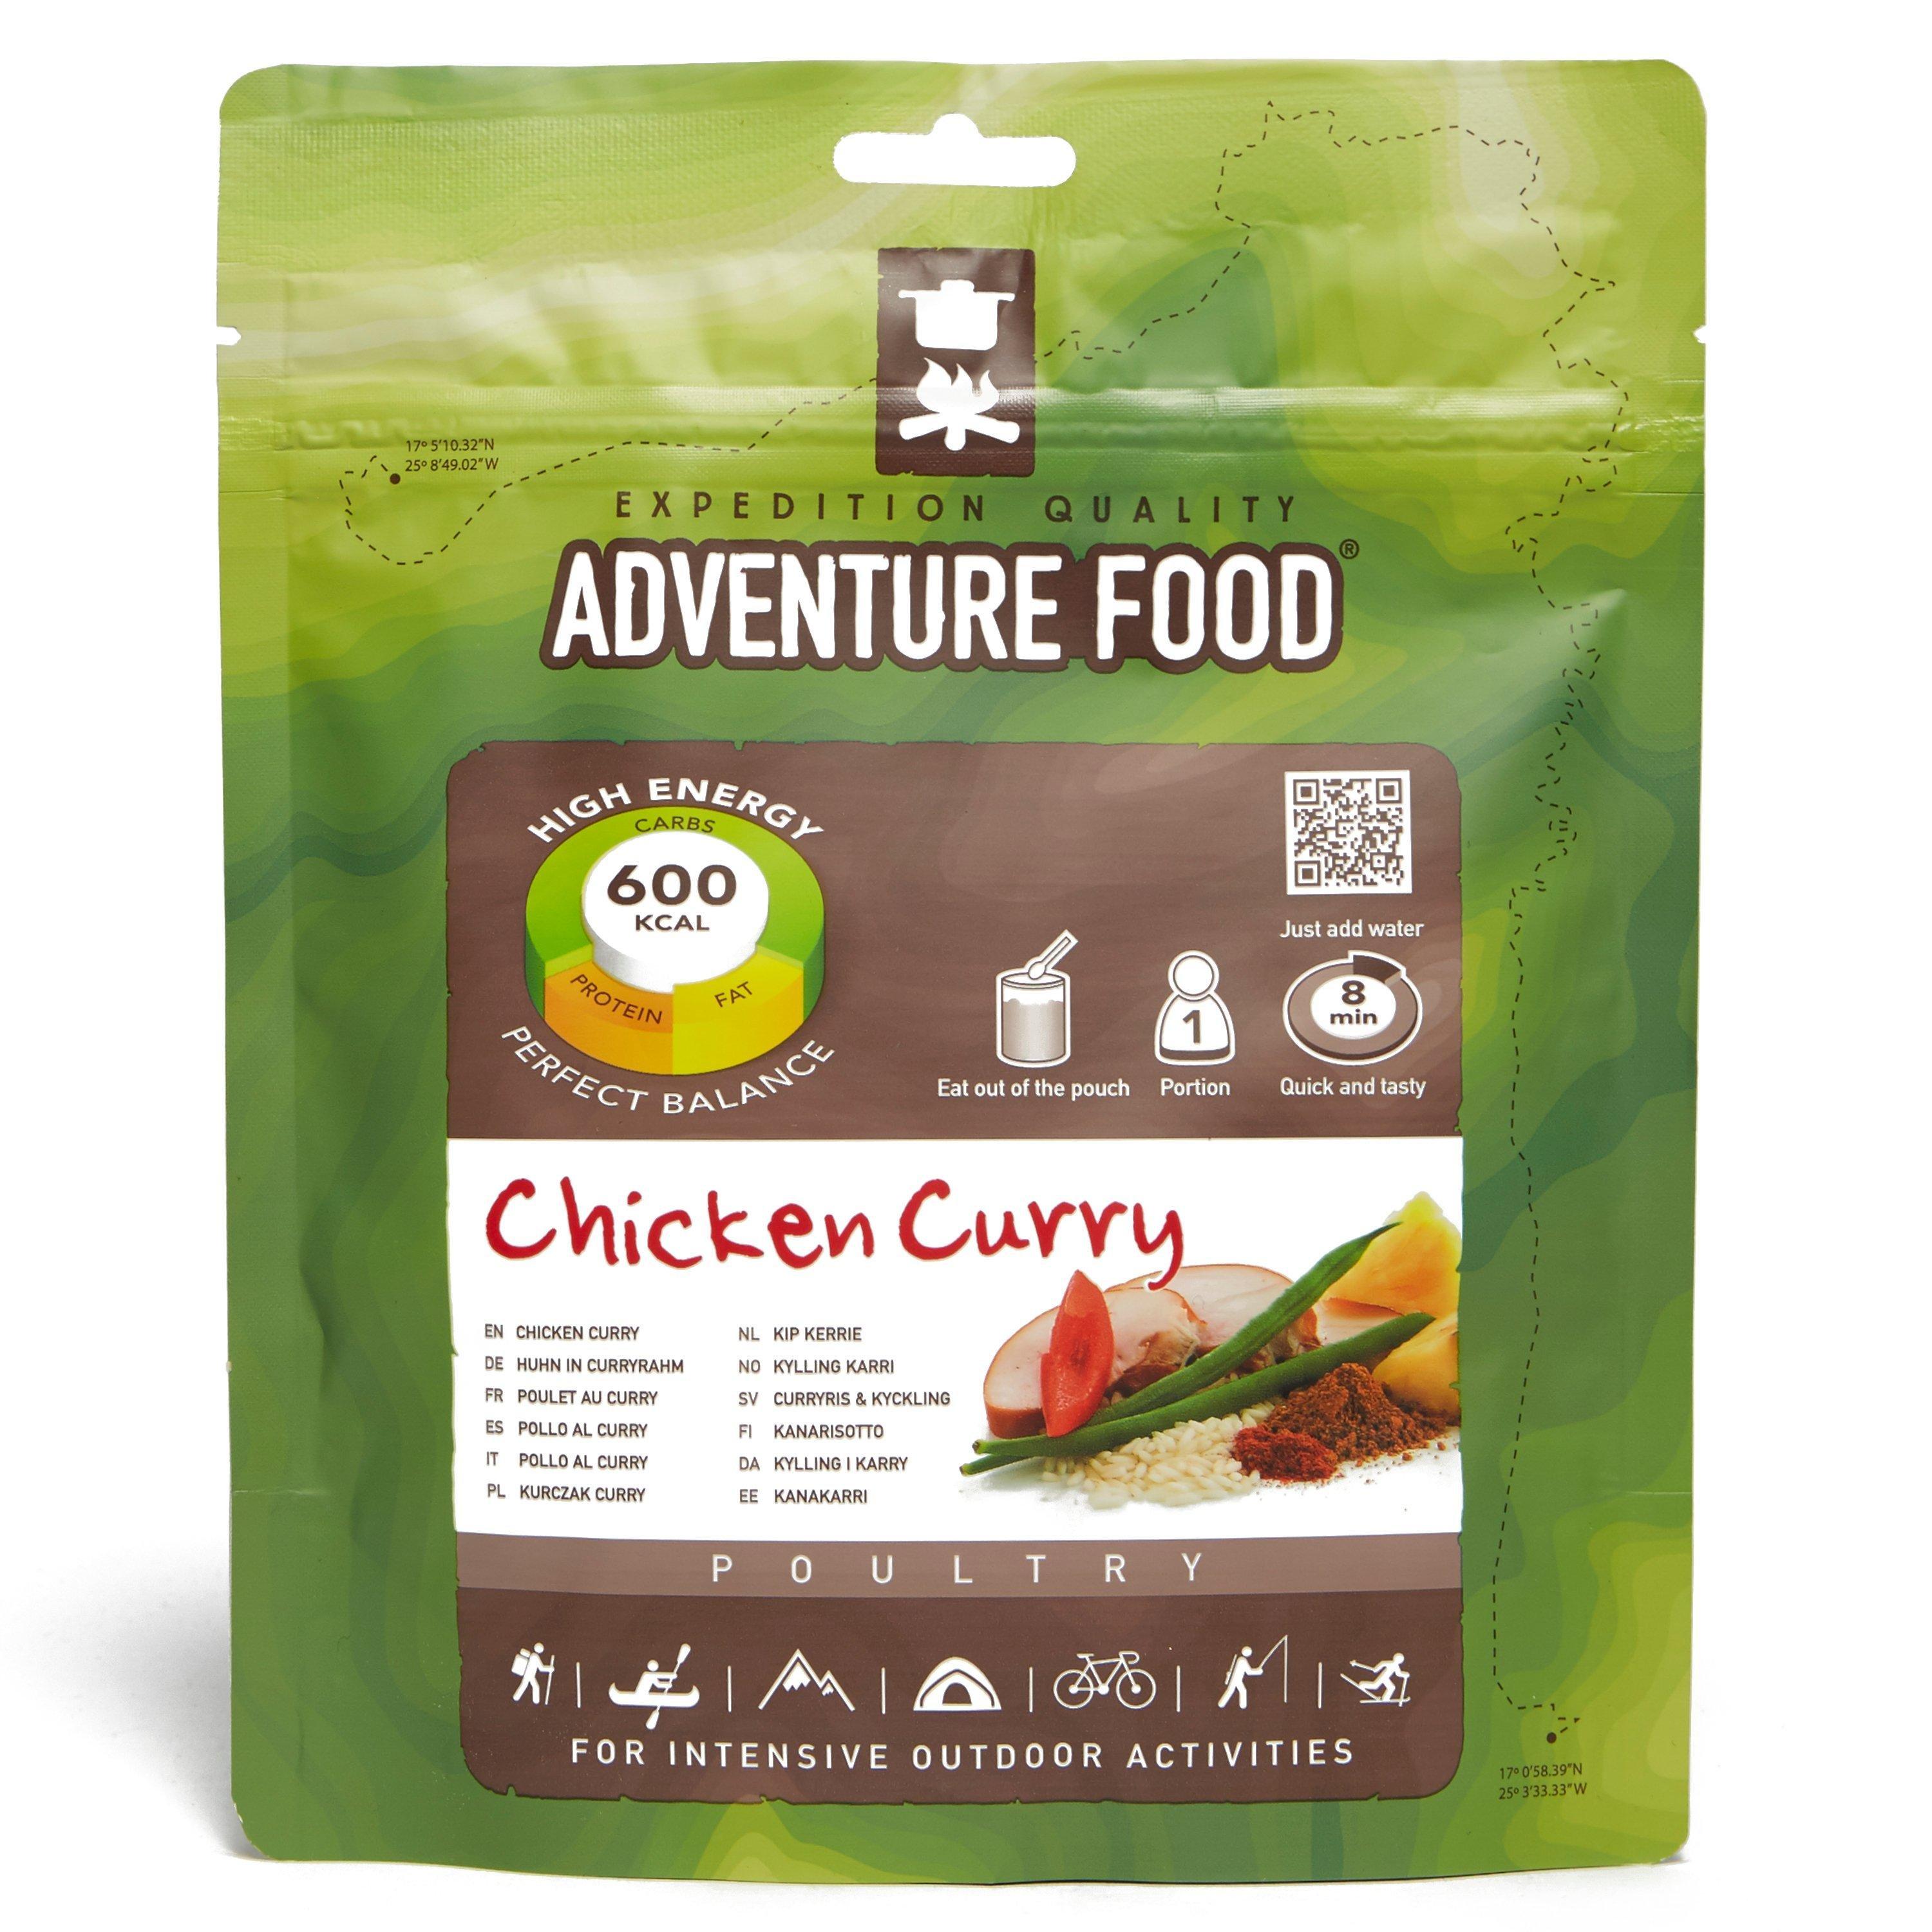 Trekmates Chicken Curry Review